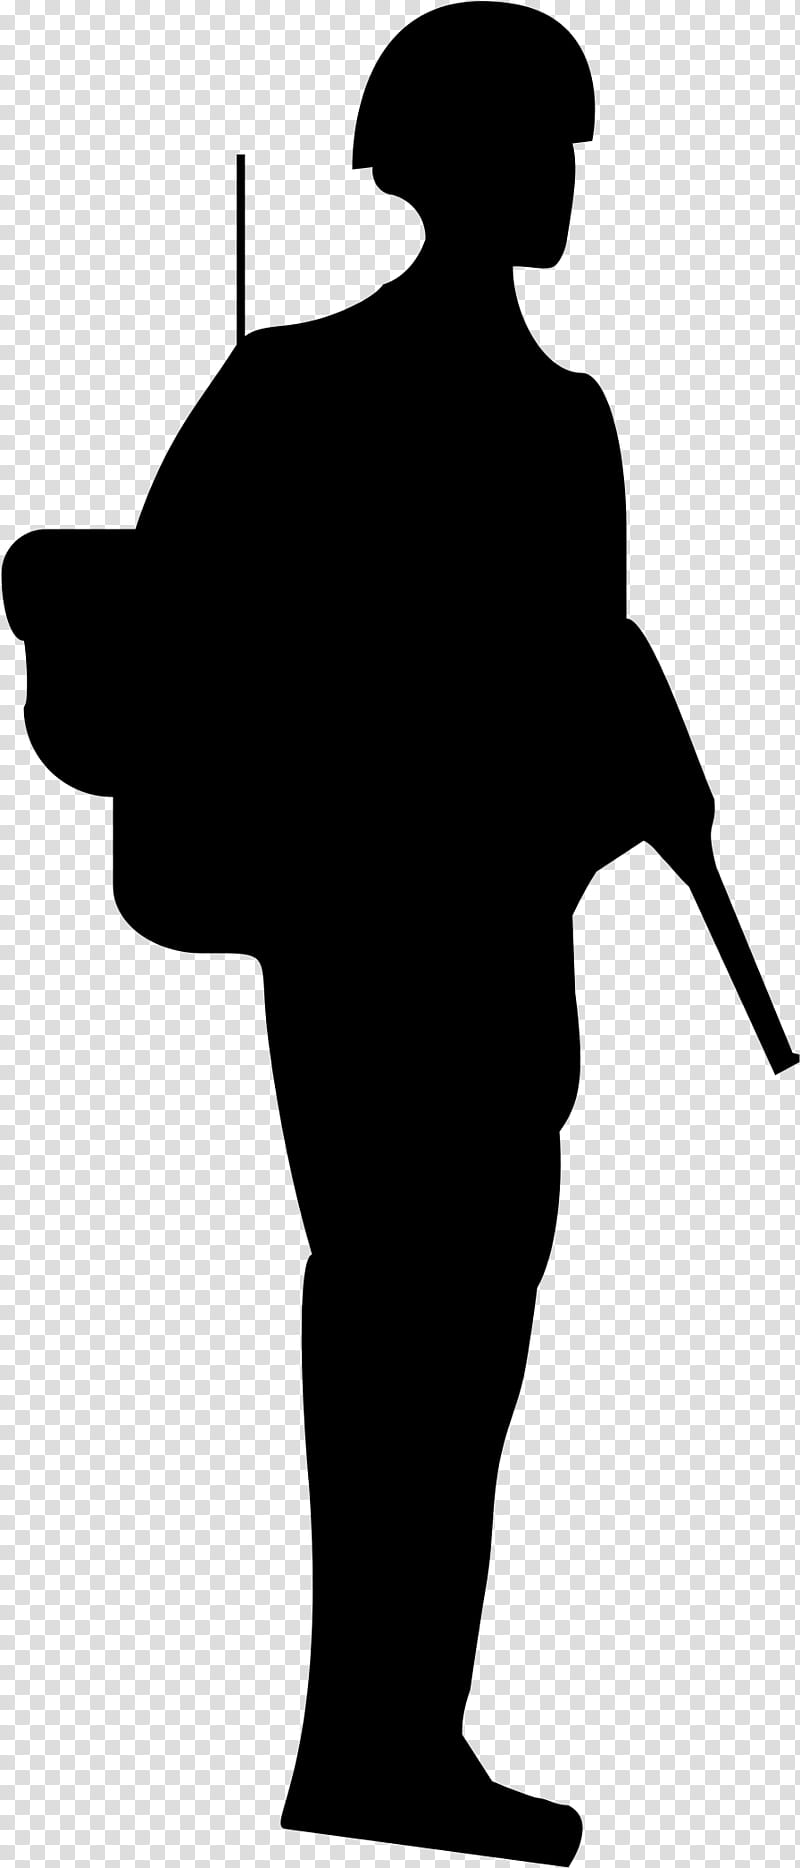 Soldier Silhouette, Army, Military, SALUTE, Blackandwhite transparent background PNG clipart